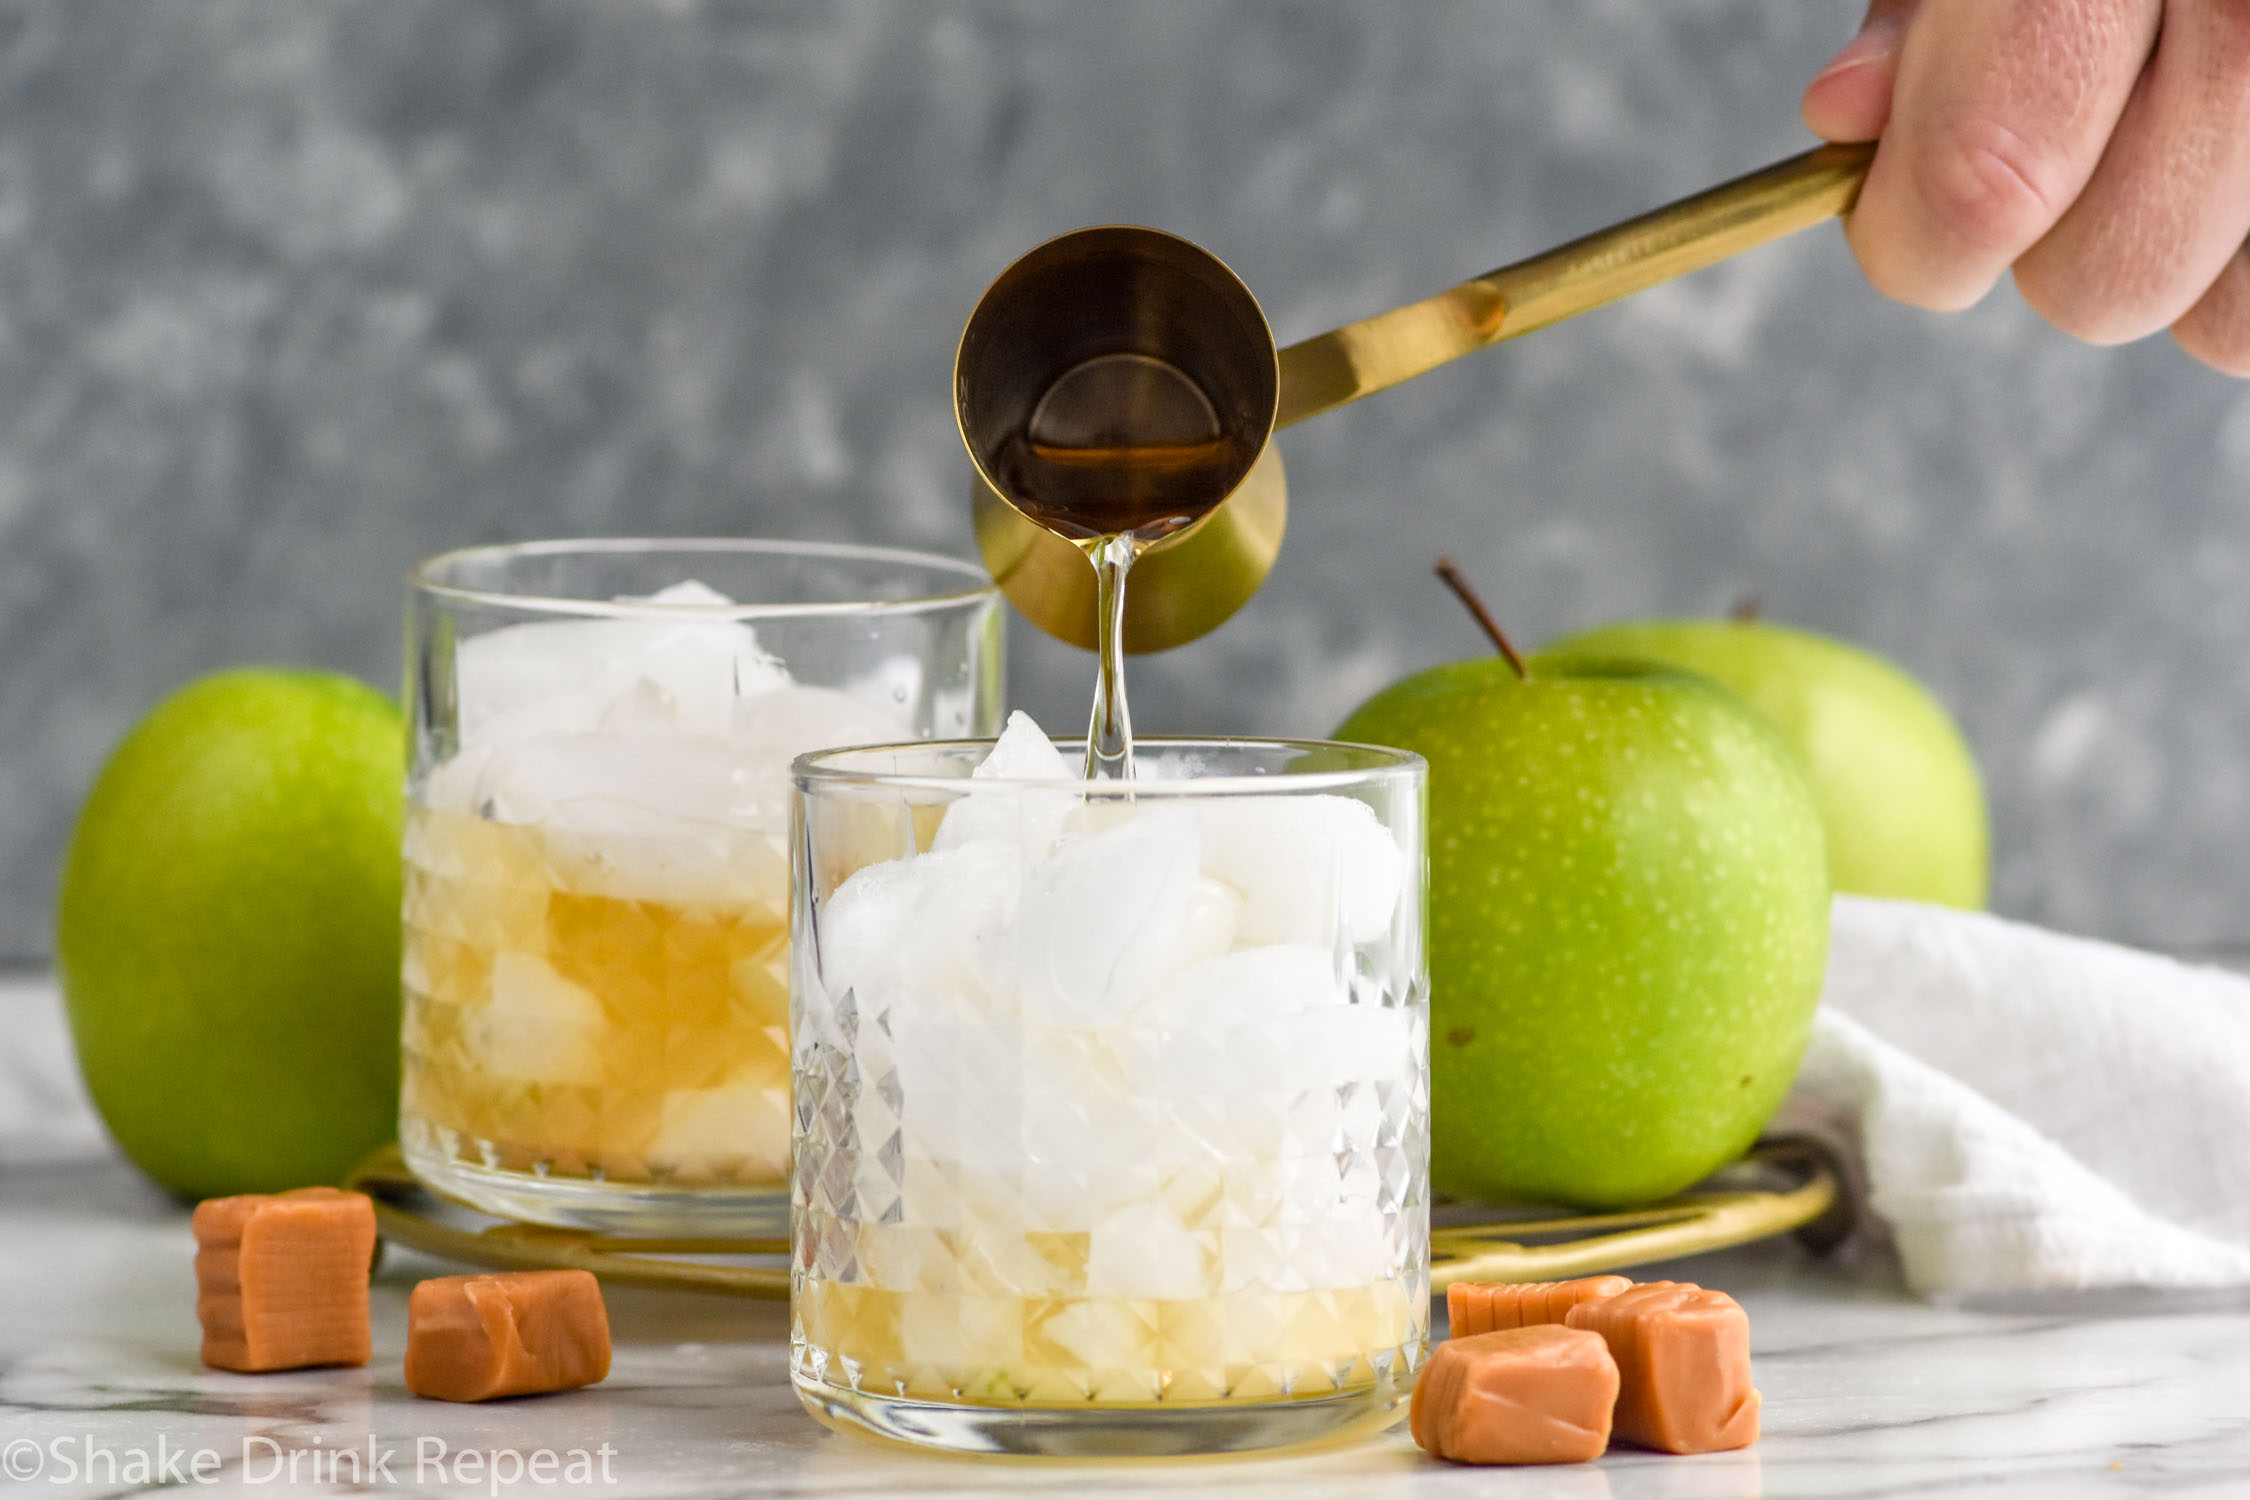 Side view of person's hand pouring cocktail jigger of ingredient into tumbler with ice and ingredients for Caramel Apple Old Fashioned recipe. Caramels and apples beside.